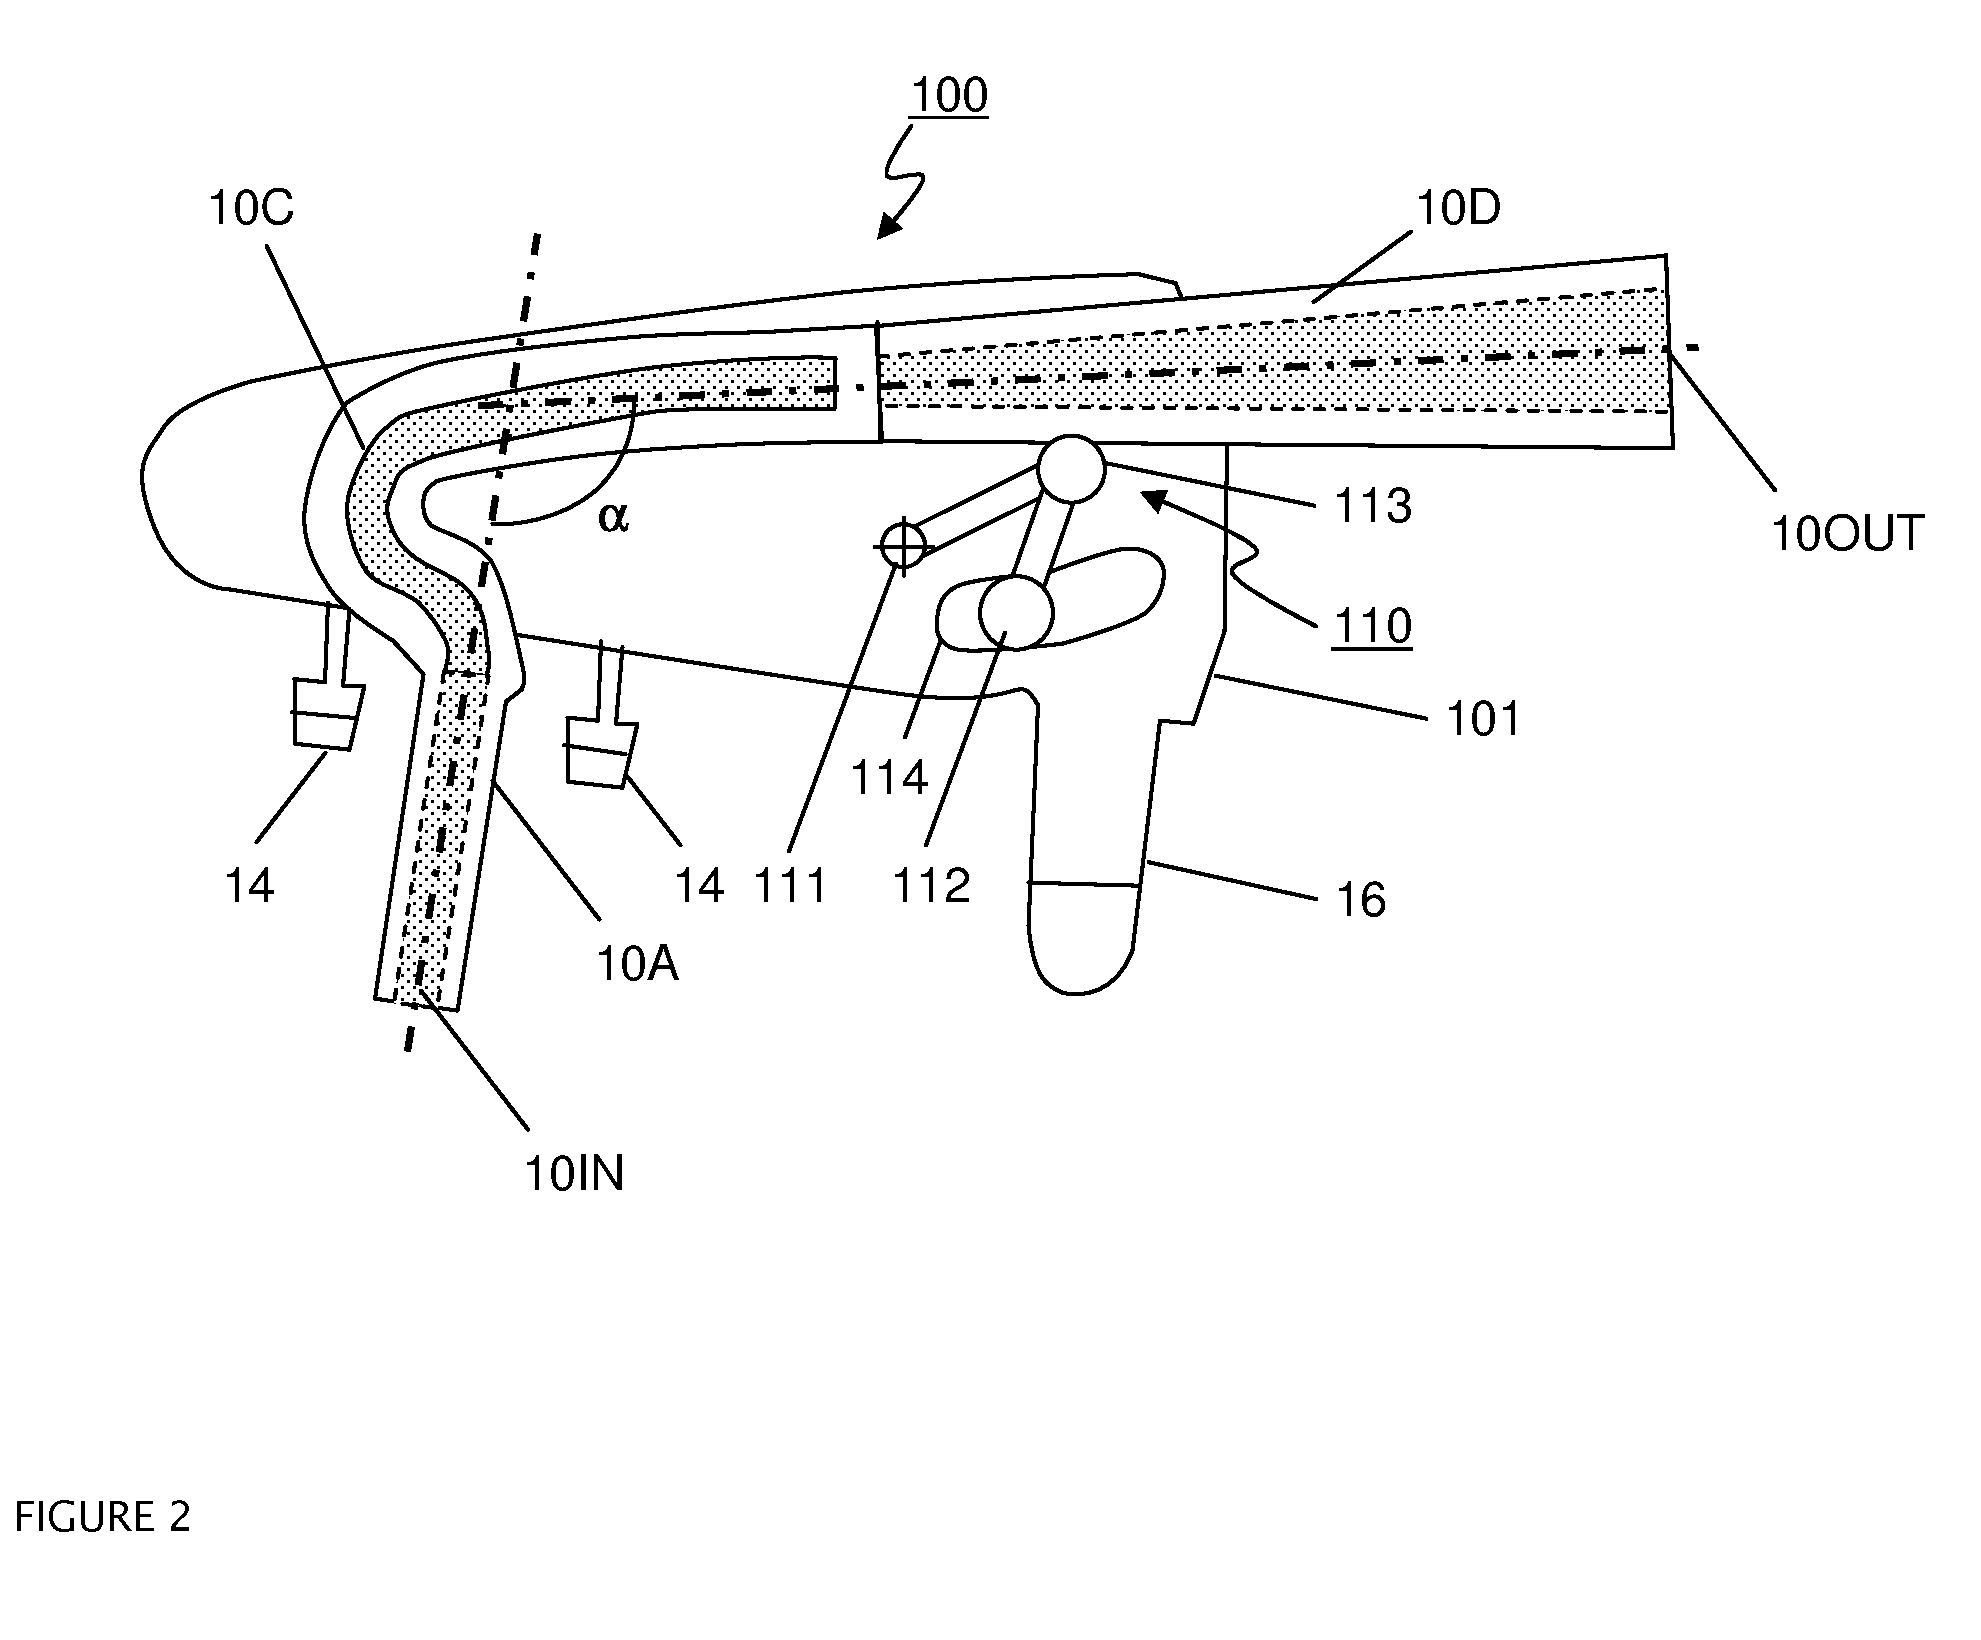 Dispensing appliance provided with a removable dispensing cartridge